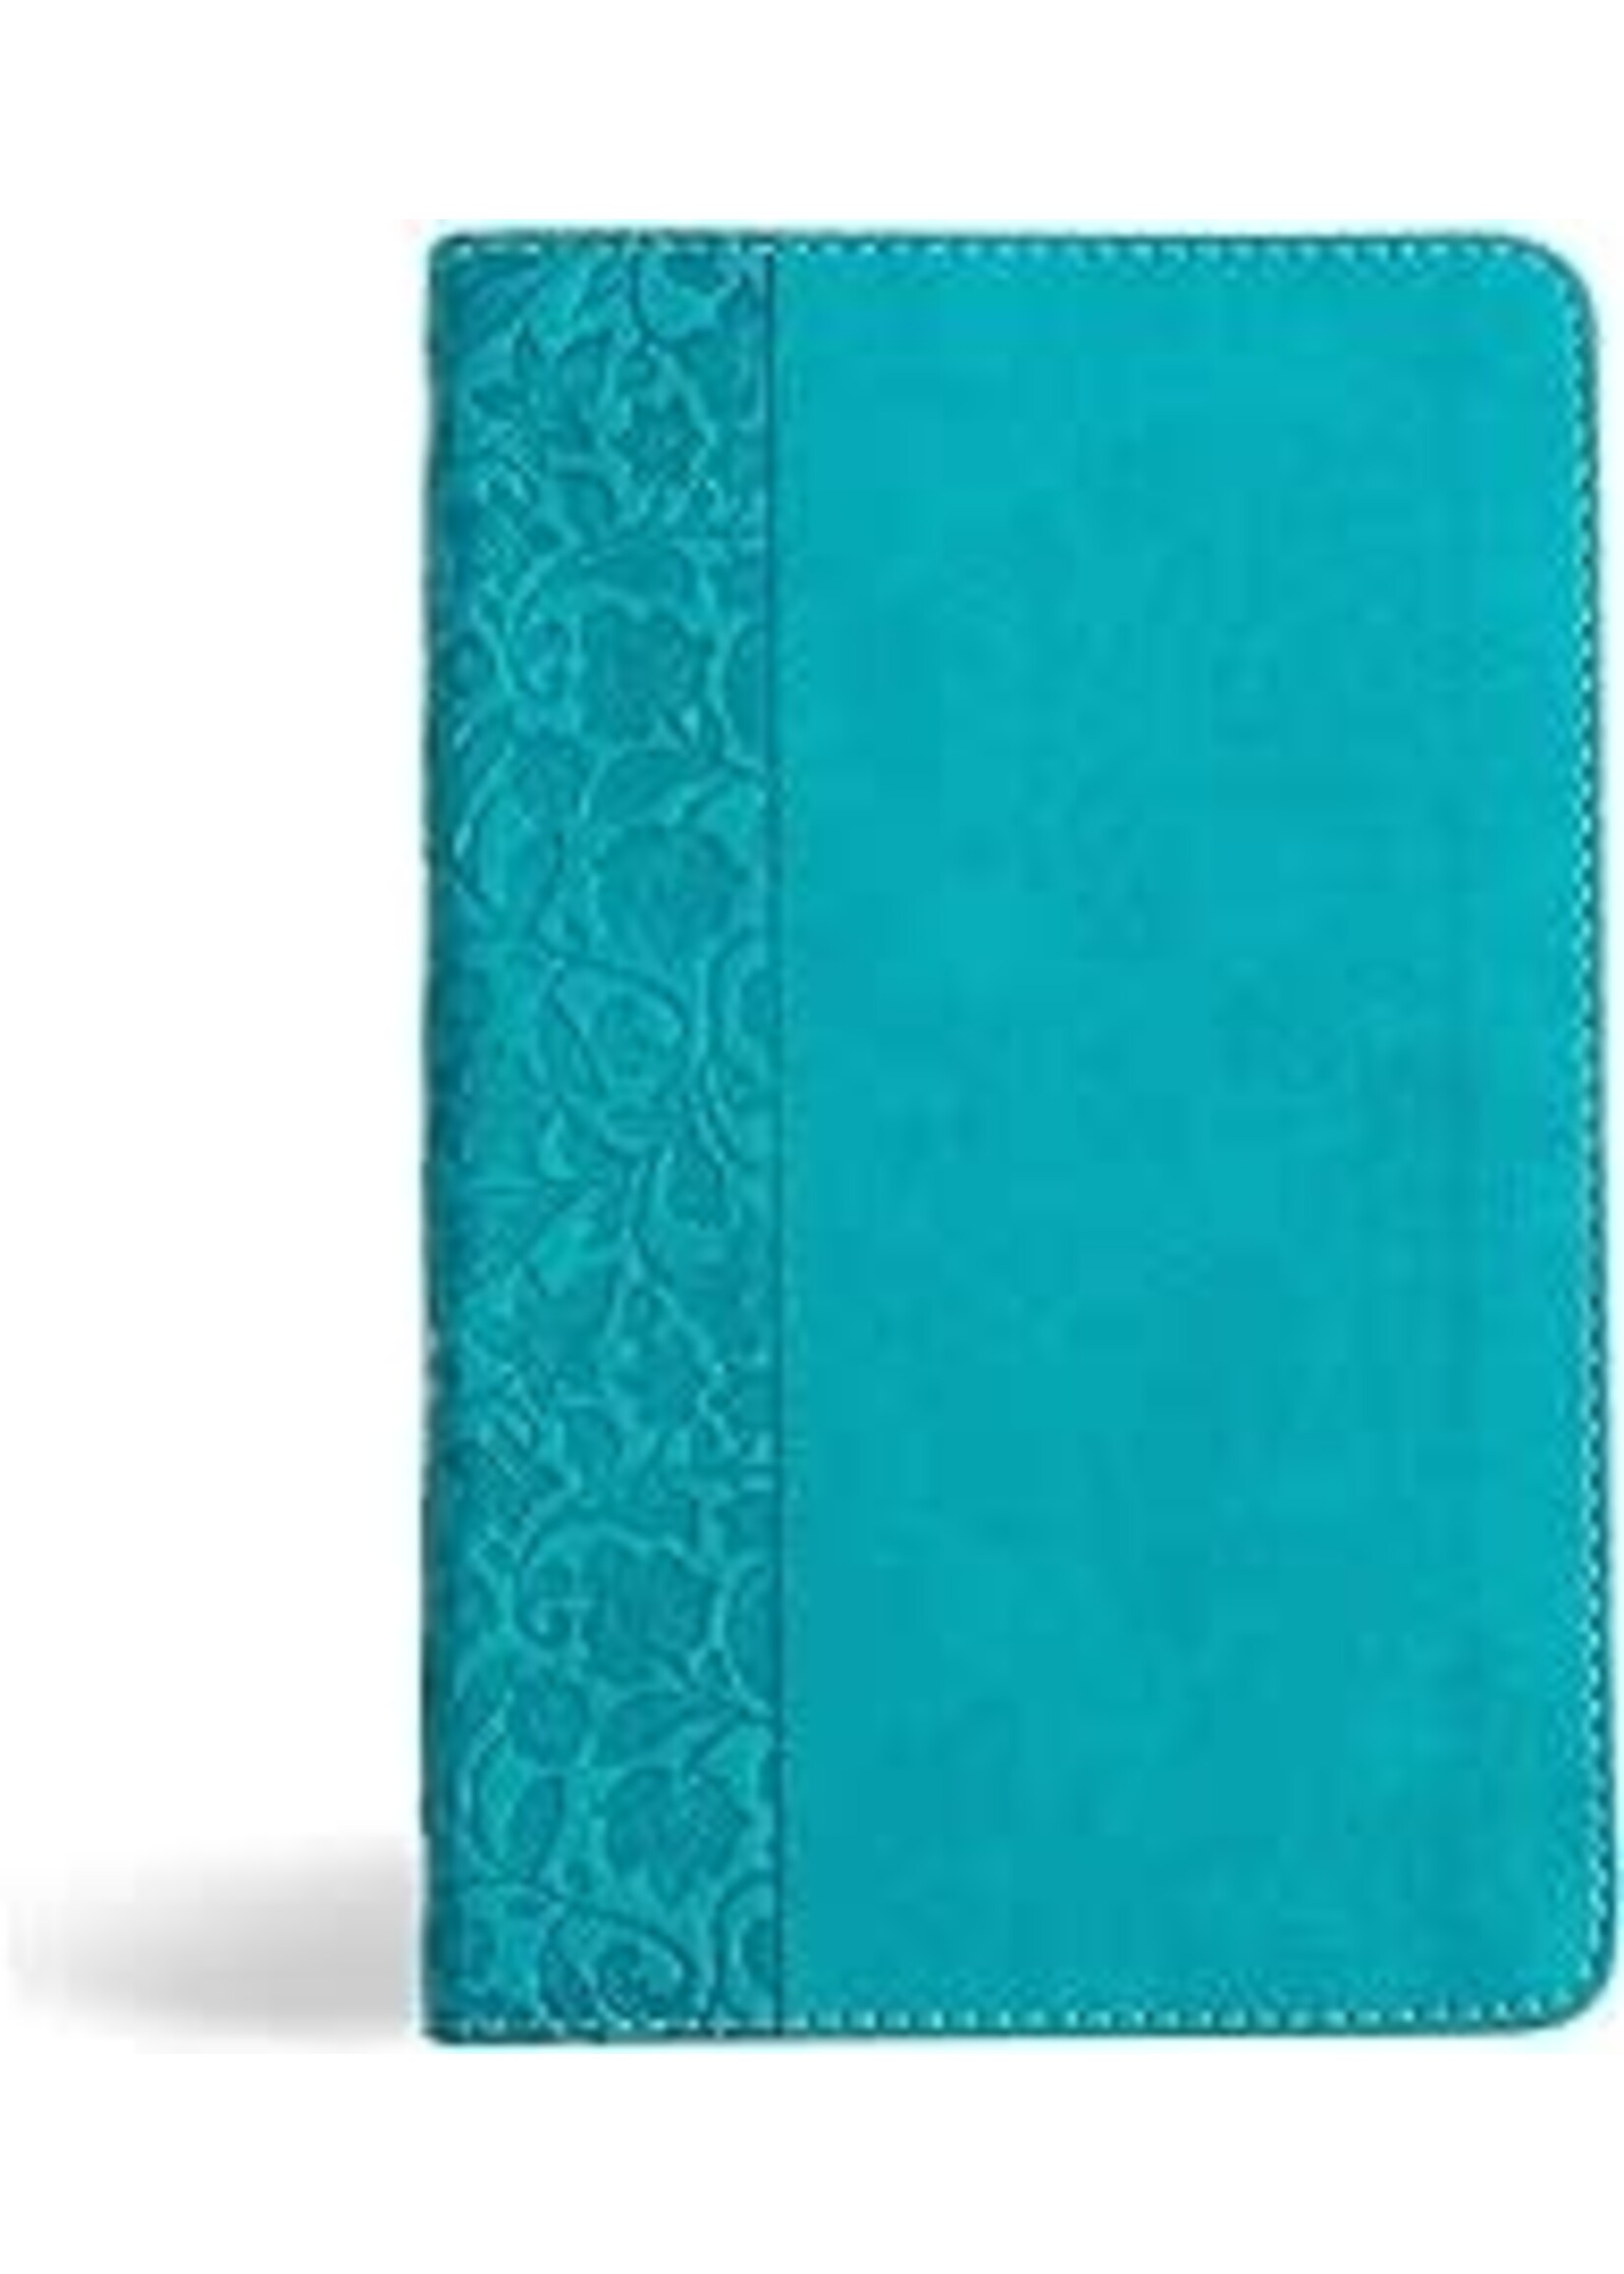 NASB 2020 Personal Size Bible-Teal LeatherTouch